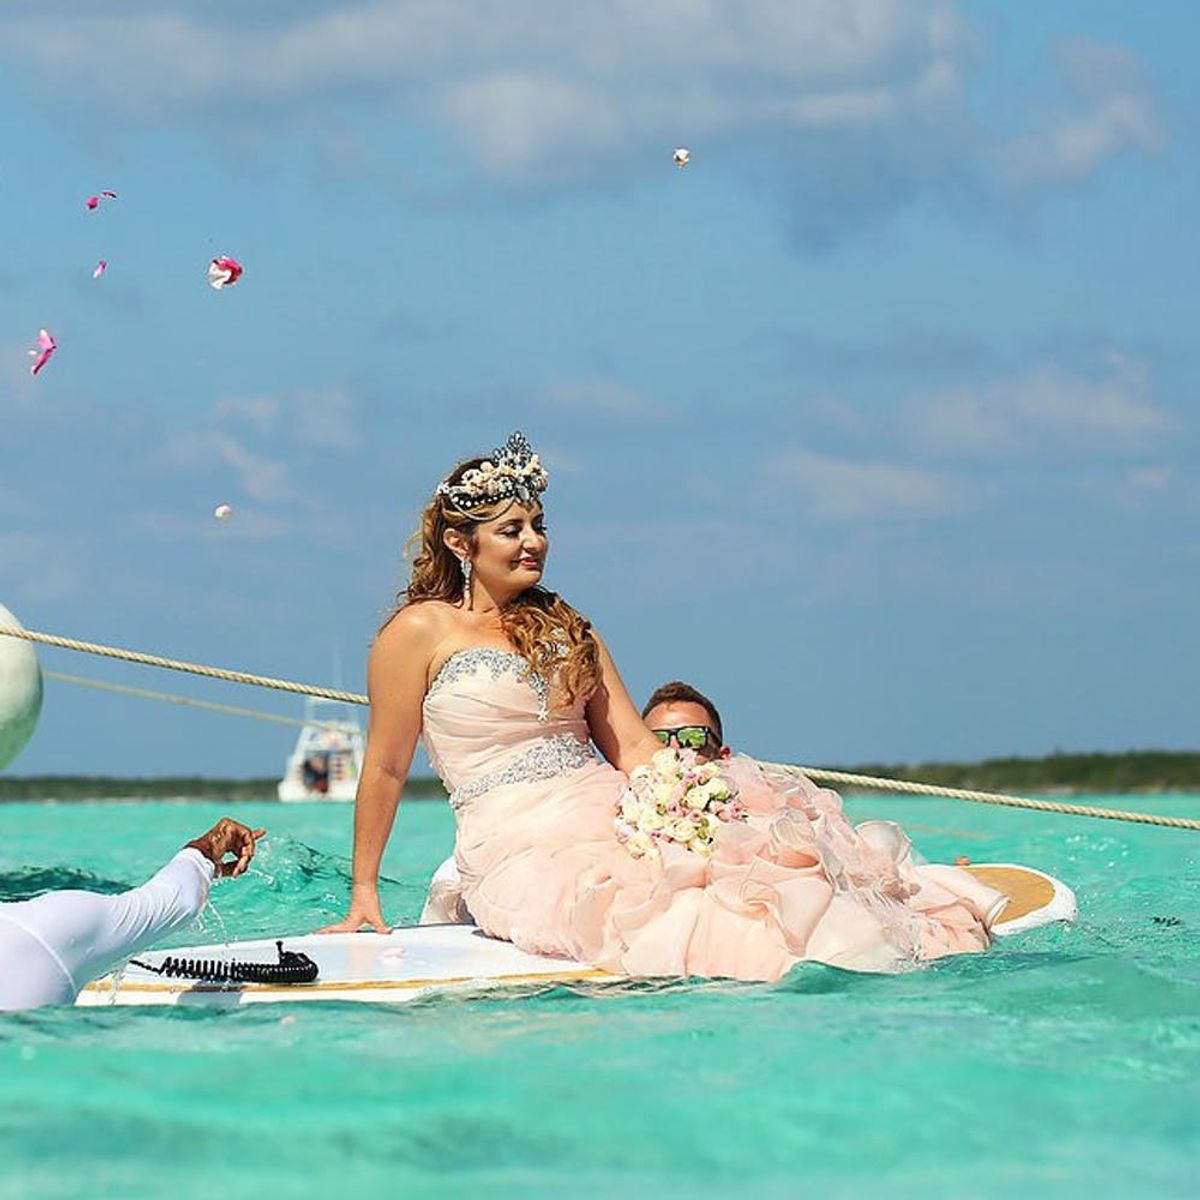 This Woman’s Mermaid Wedding Throws All Other Wedding Photos Out of the Water